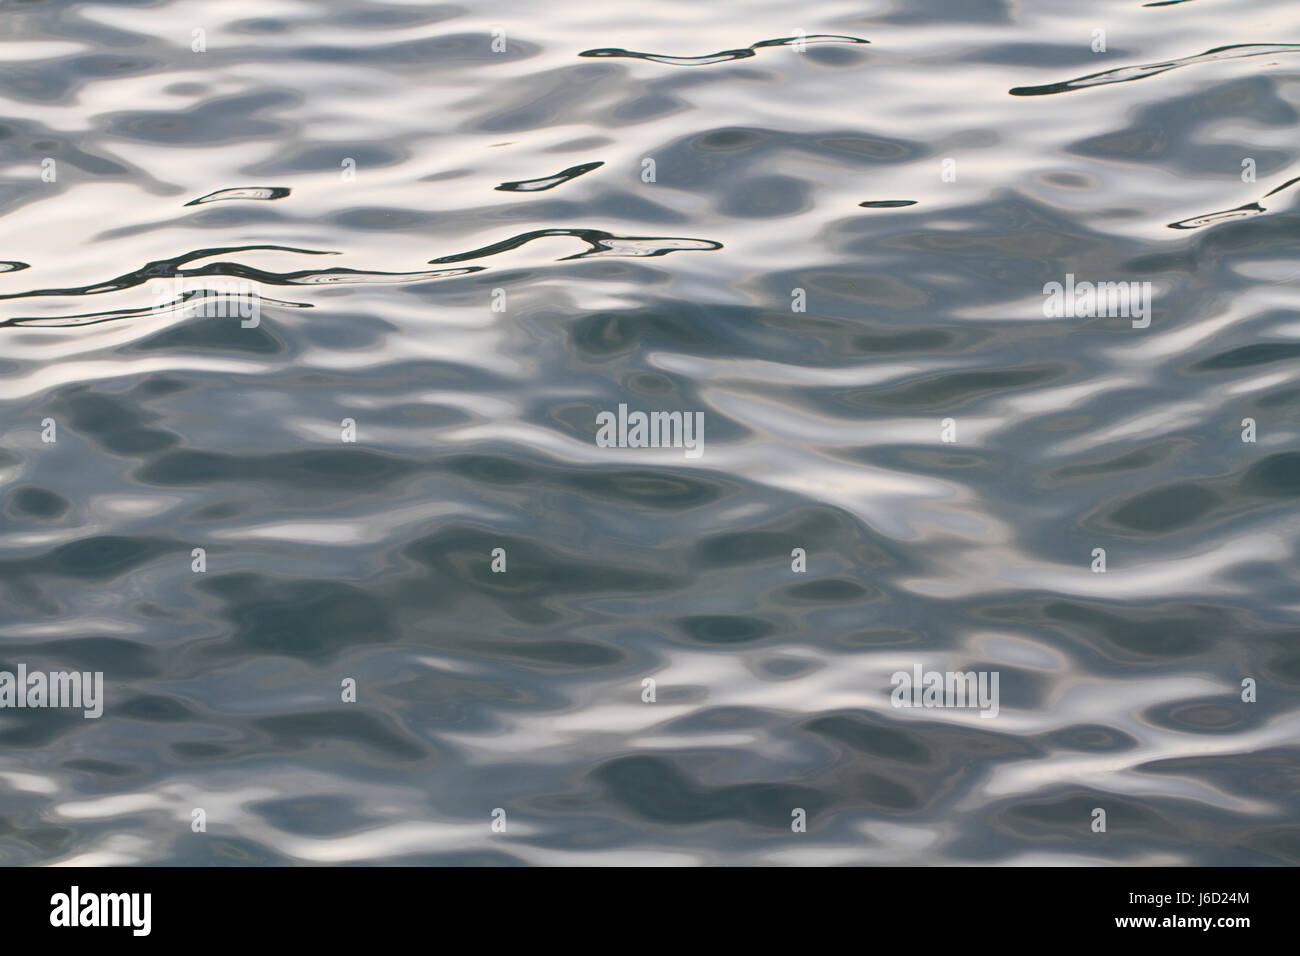 The surface of a cold, grey ocean with smooth ripples and waves that are contrasting between dark and light in a full frame nature background image.. Stock Photo